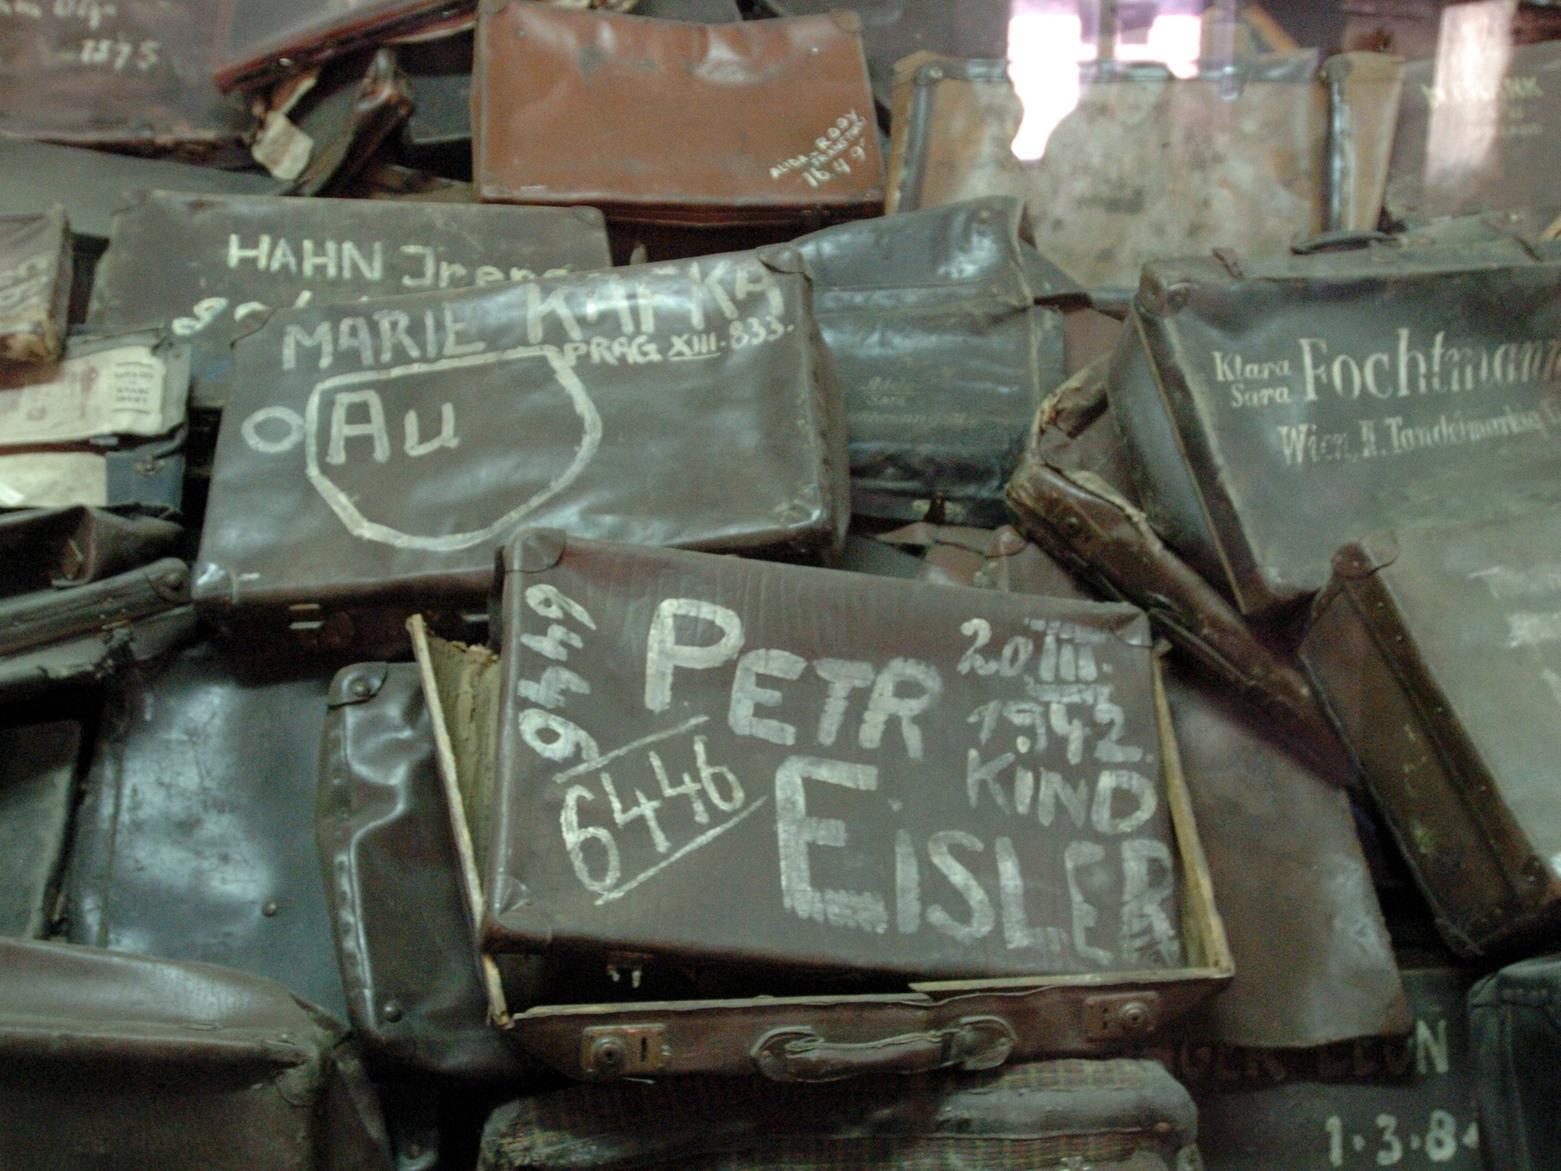 Cases which contained the belongings of the Jews brought to Auschwitz-Birkenau.